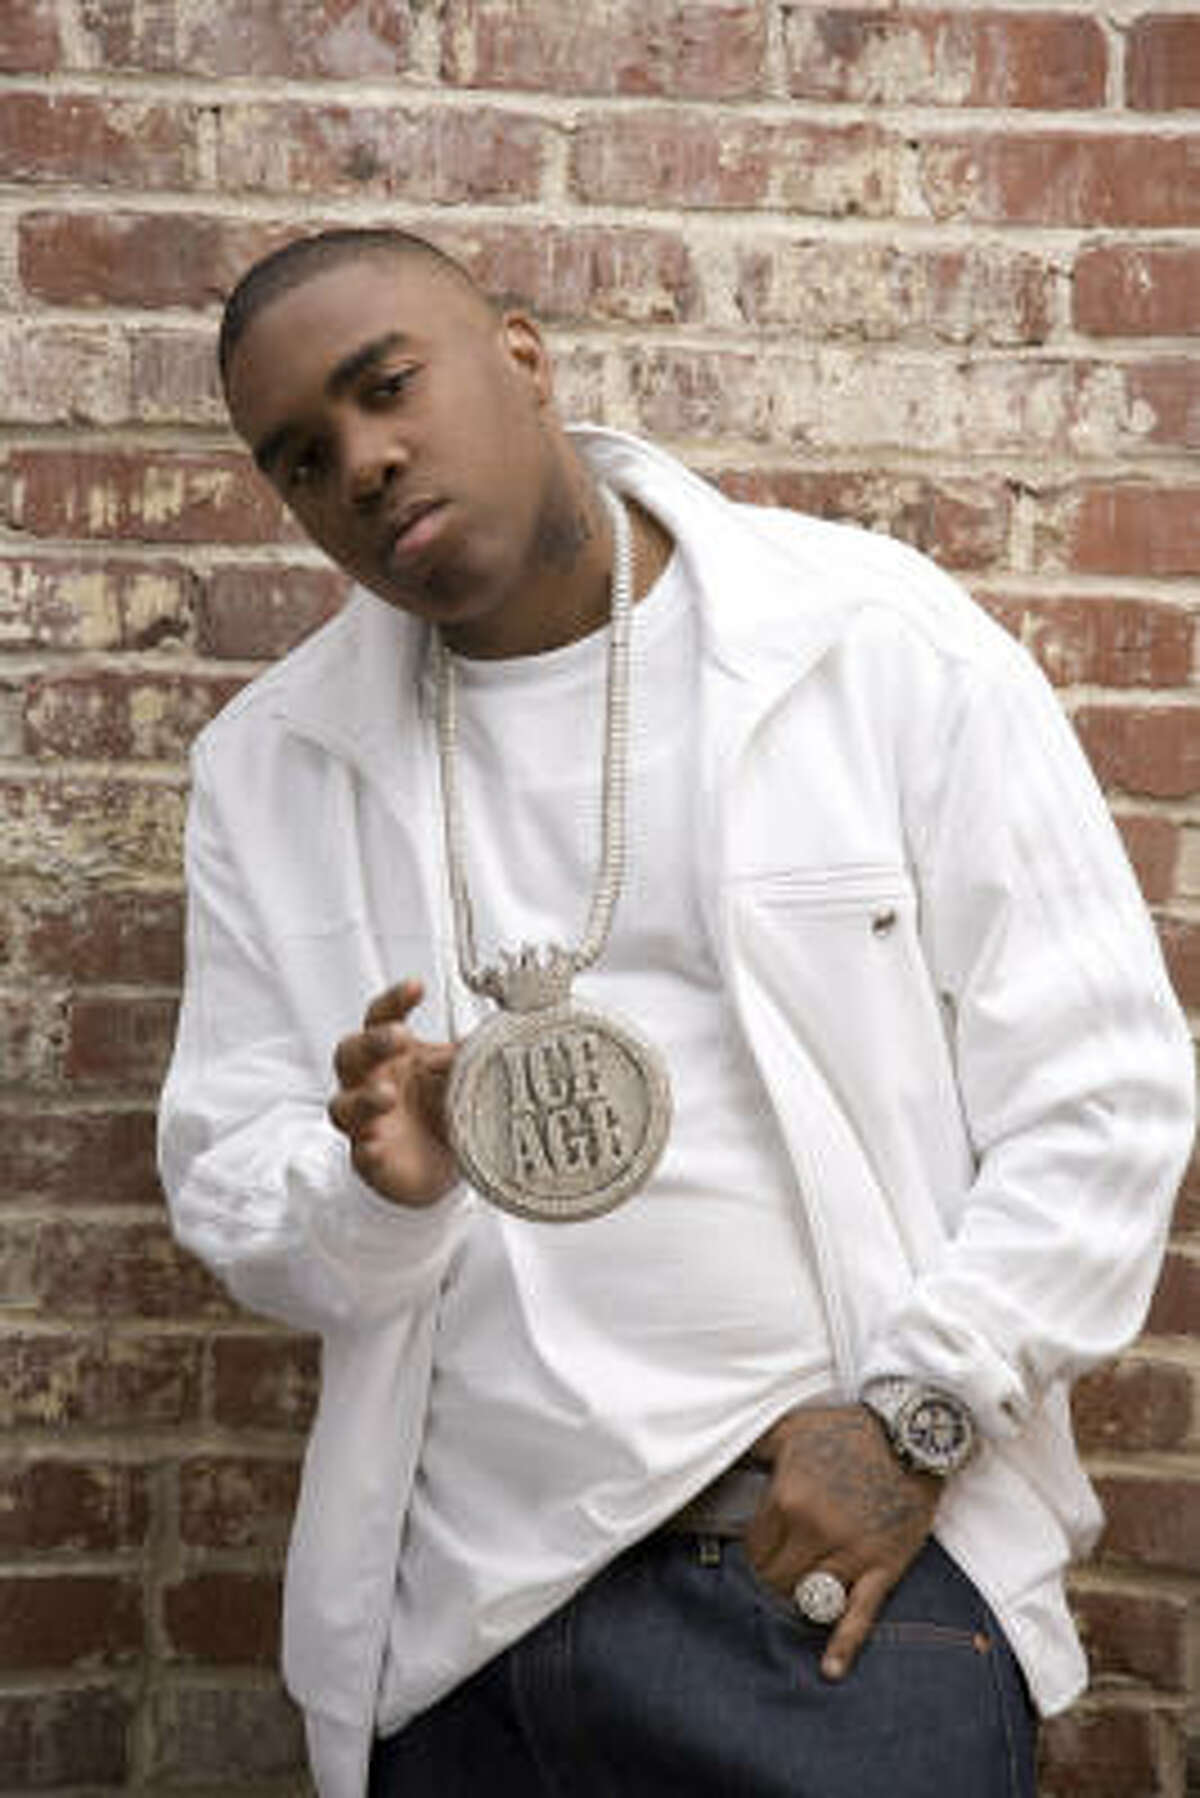 Houston rapper Mike Jones sold more than 1 million copies of debut album Who is Mike Jones? The follow-up, The Voice, has gone through several delays and unsuccessful single releases.